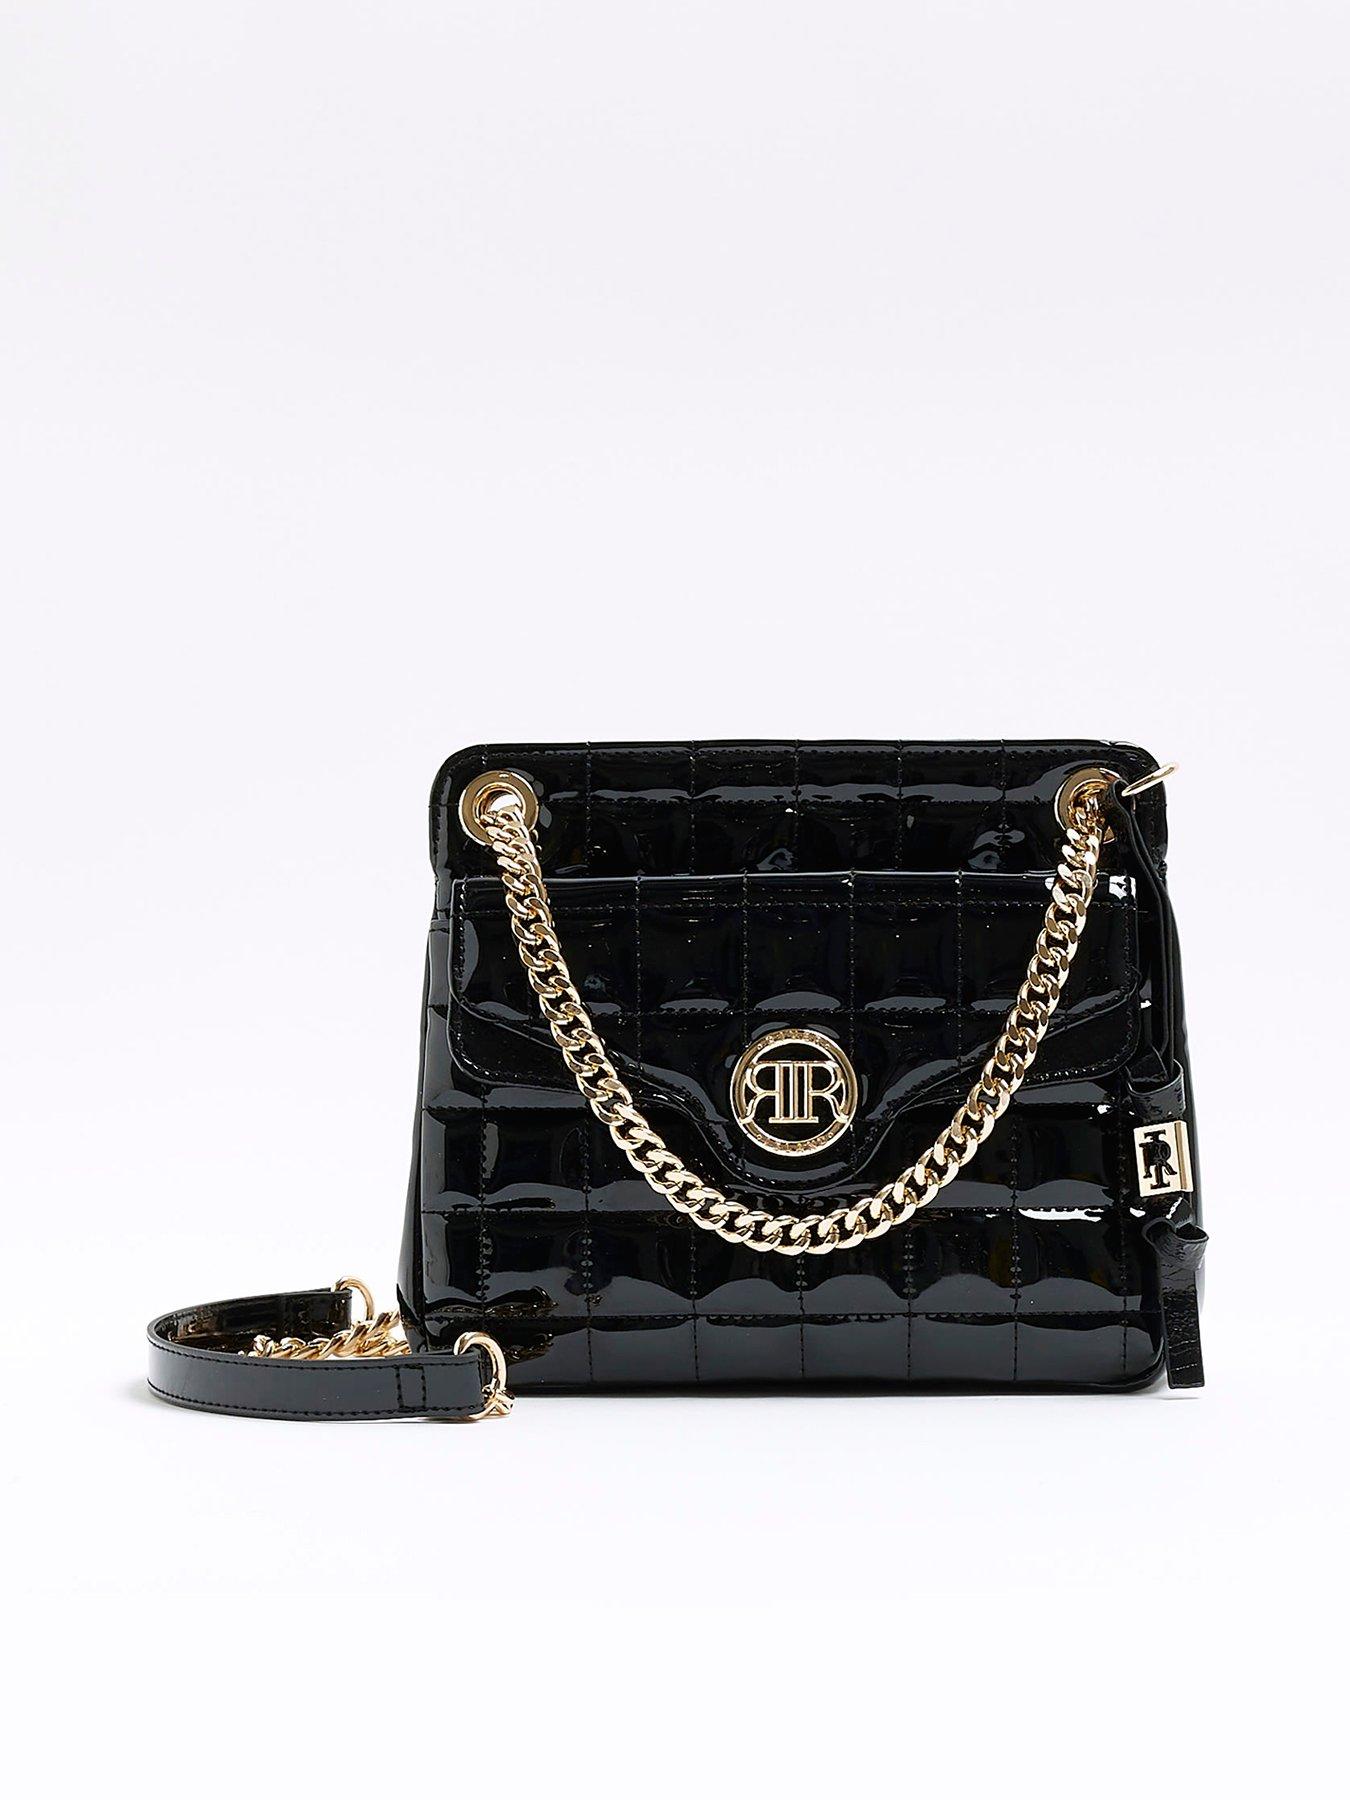 River Island Women's Quilted Chain Shoulder Bag